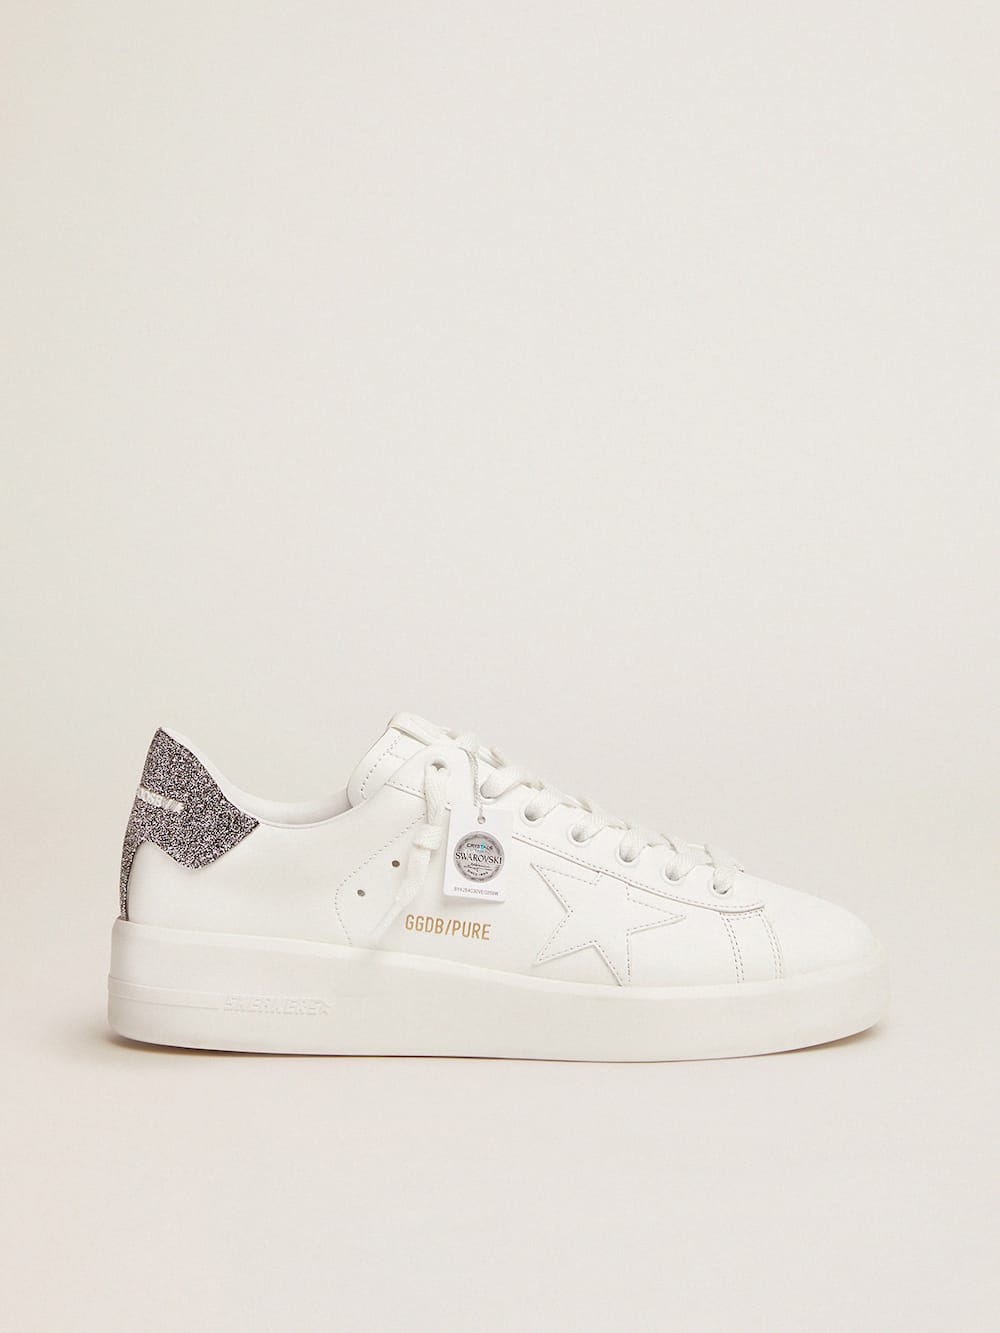 Golden Goose - Purestar in white leather with silver Swarovski crystal heel tab in 